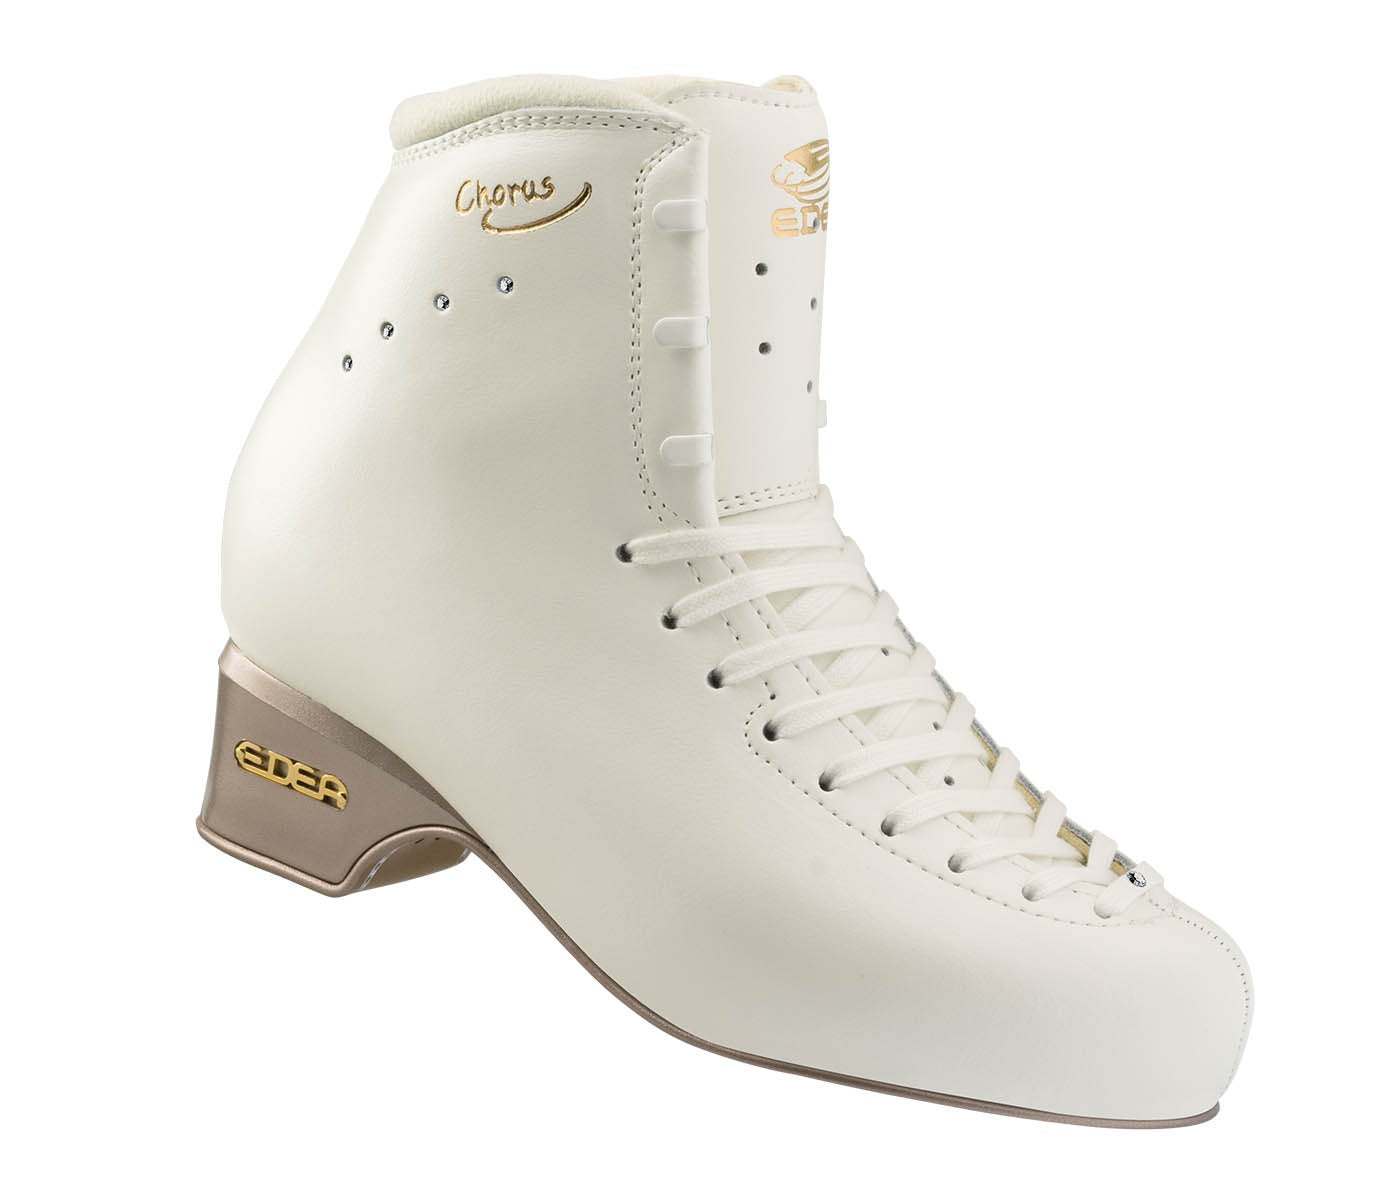 Edea Chorus Boot Only in Ivory. Junior Sizes 210 - 255